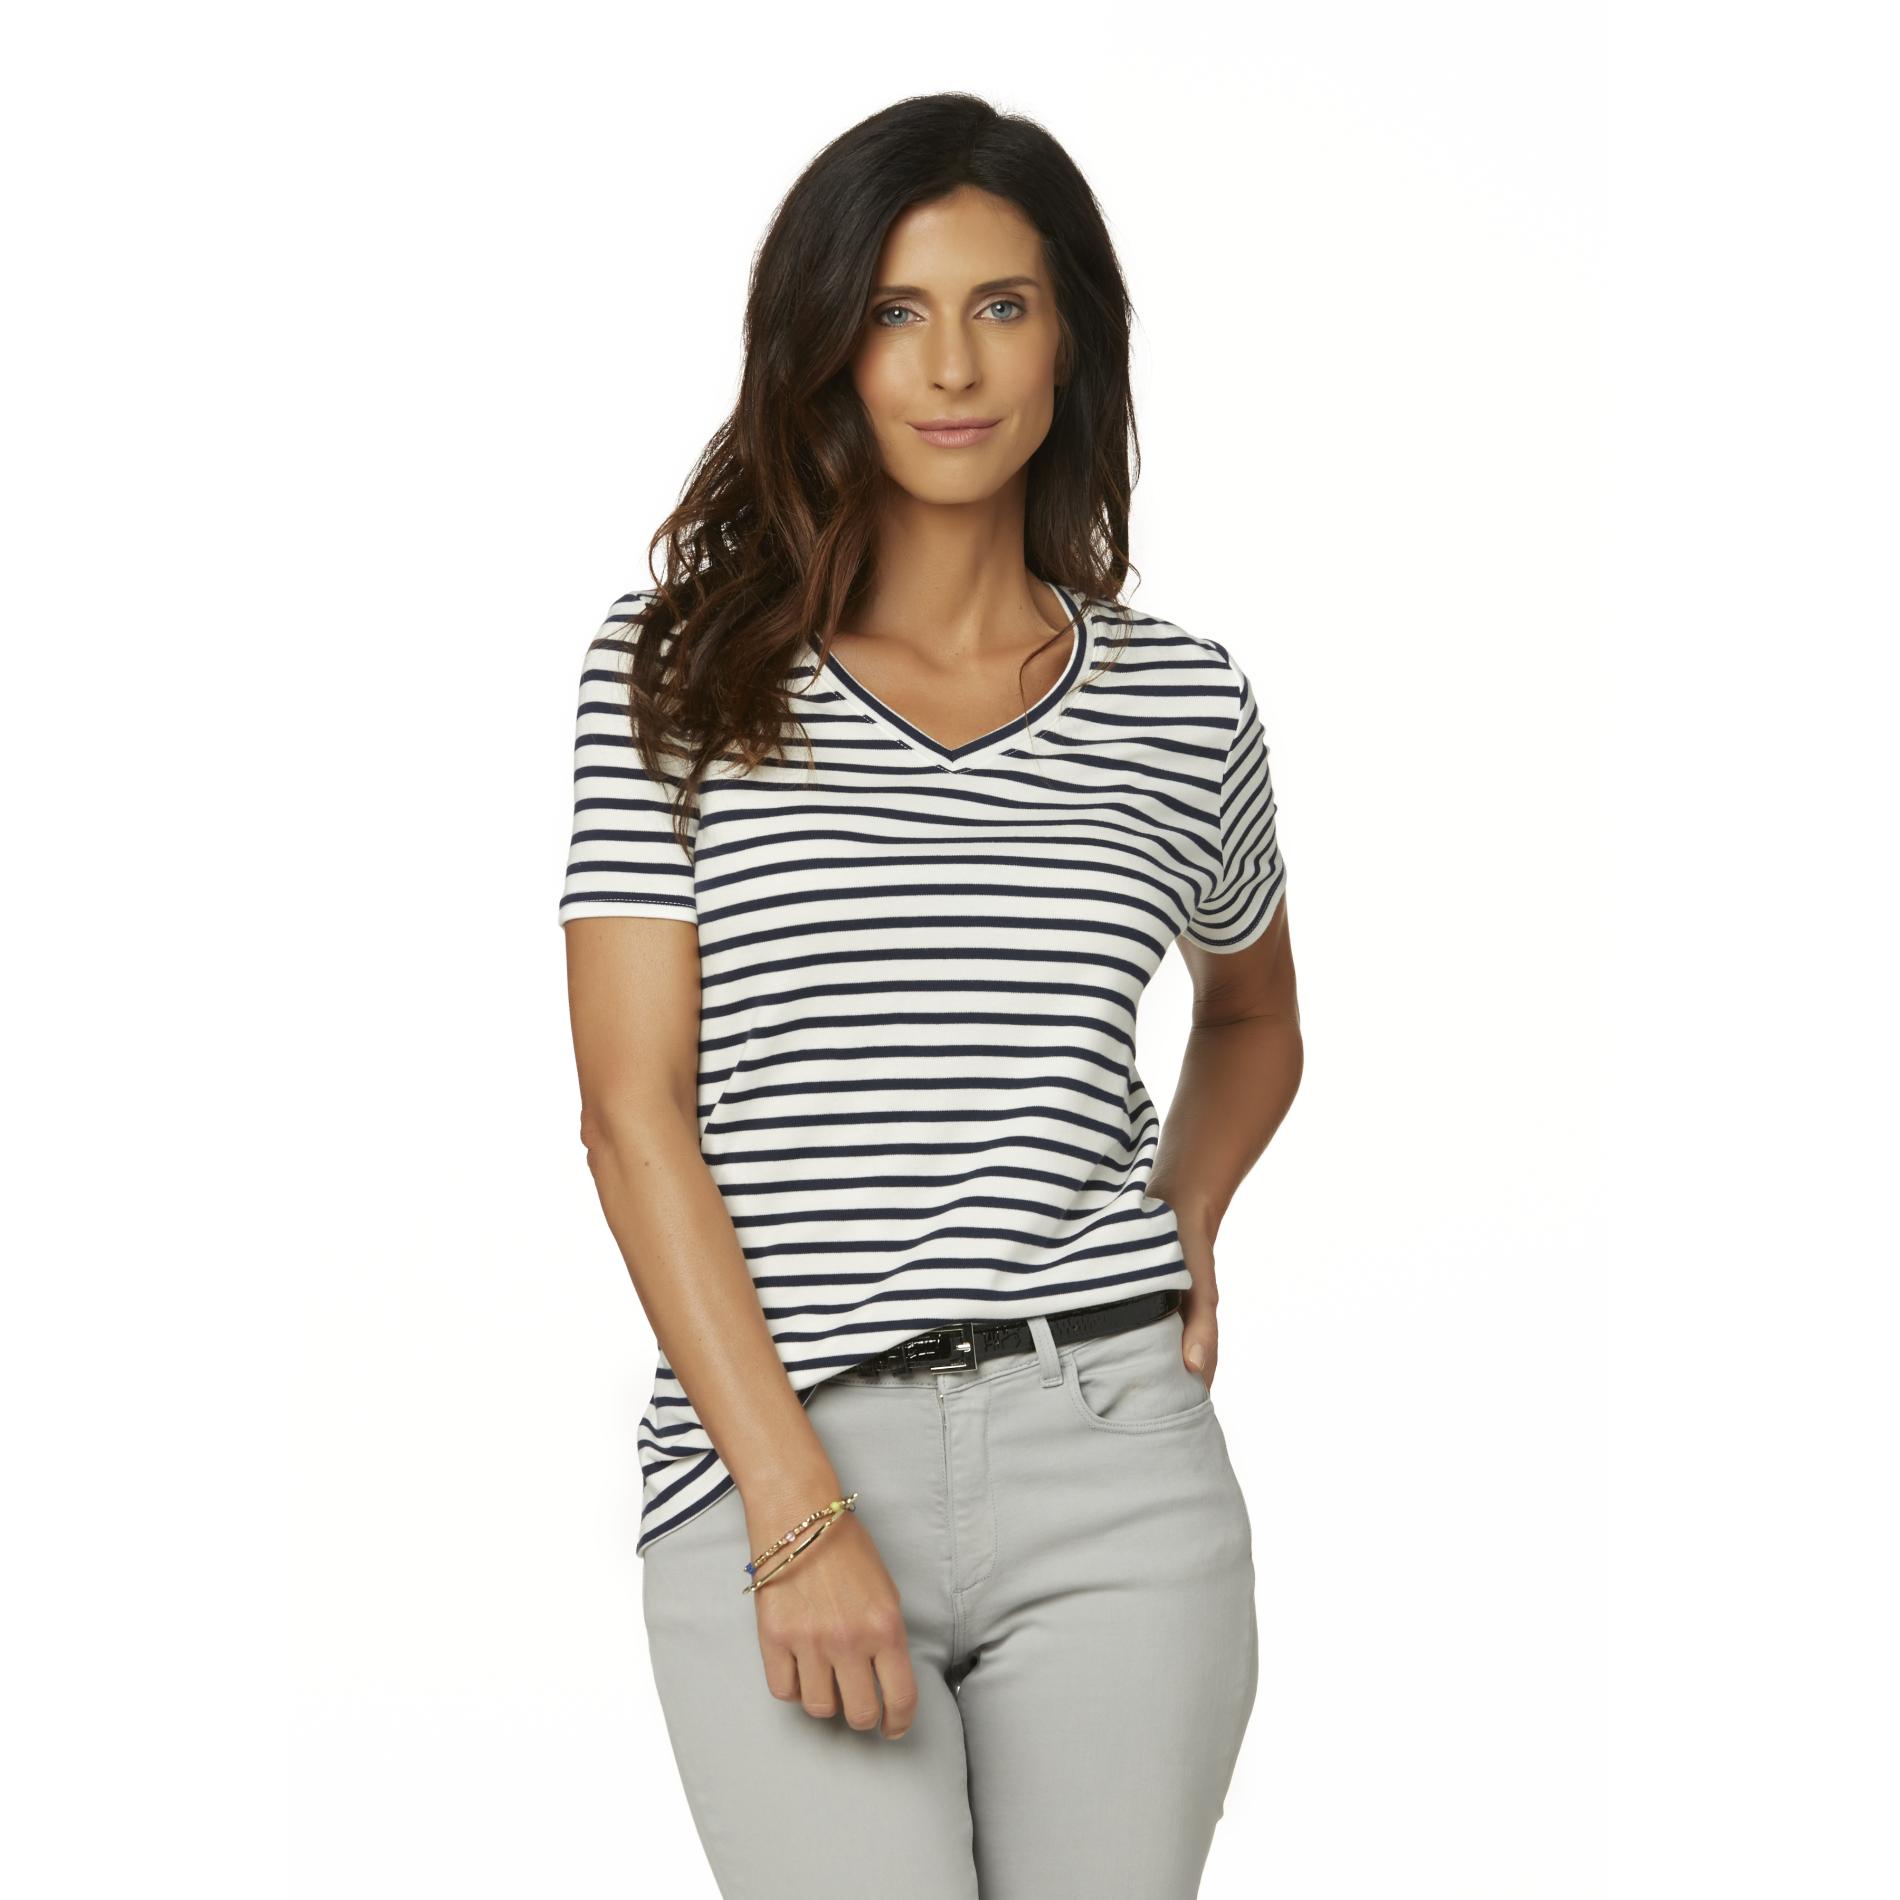 Basic Editions Women's Relaxed Fit T-Shirt - Striped